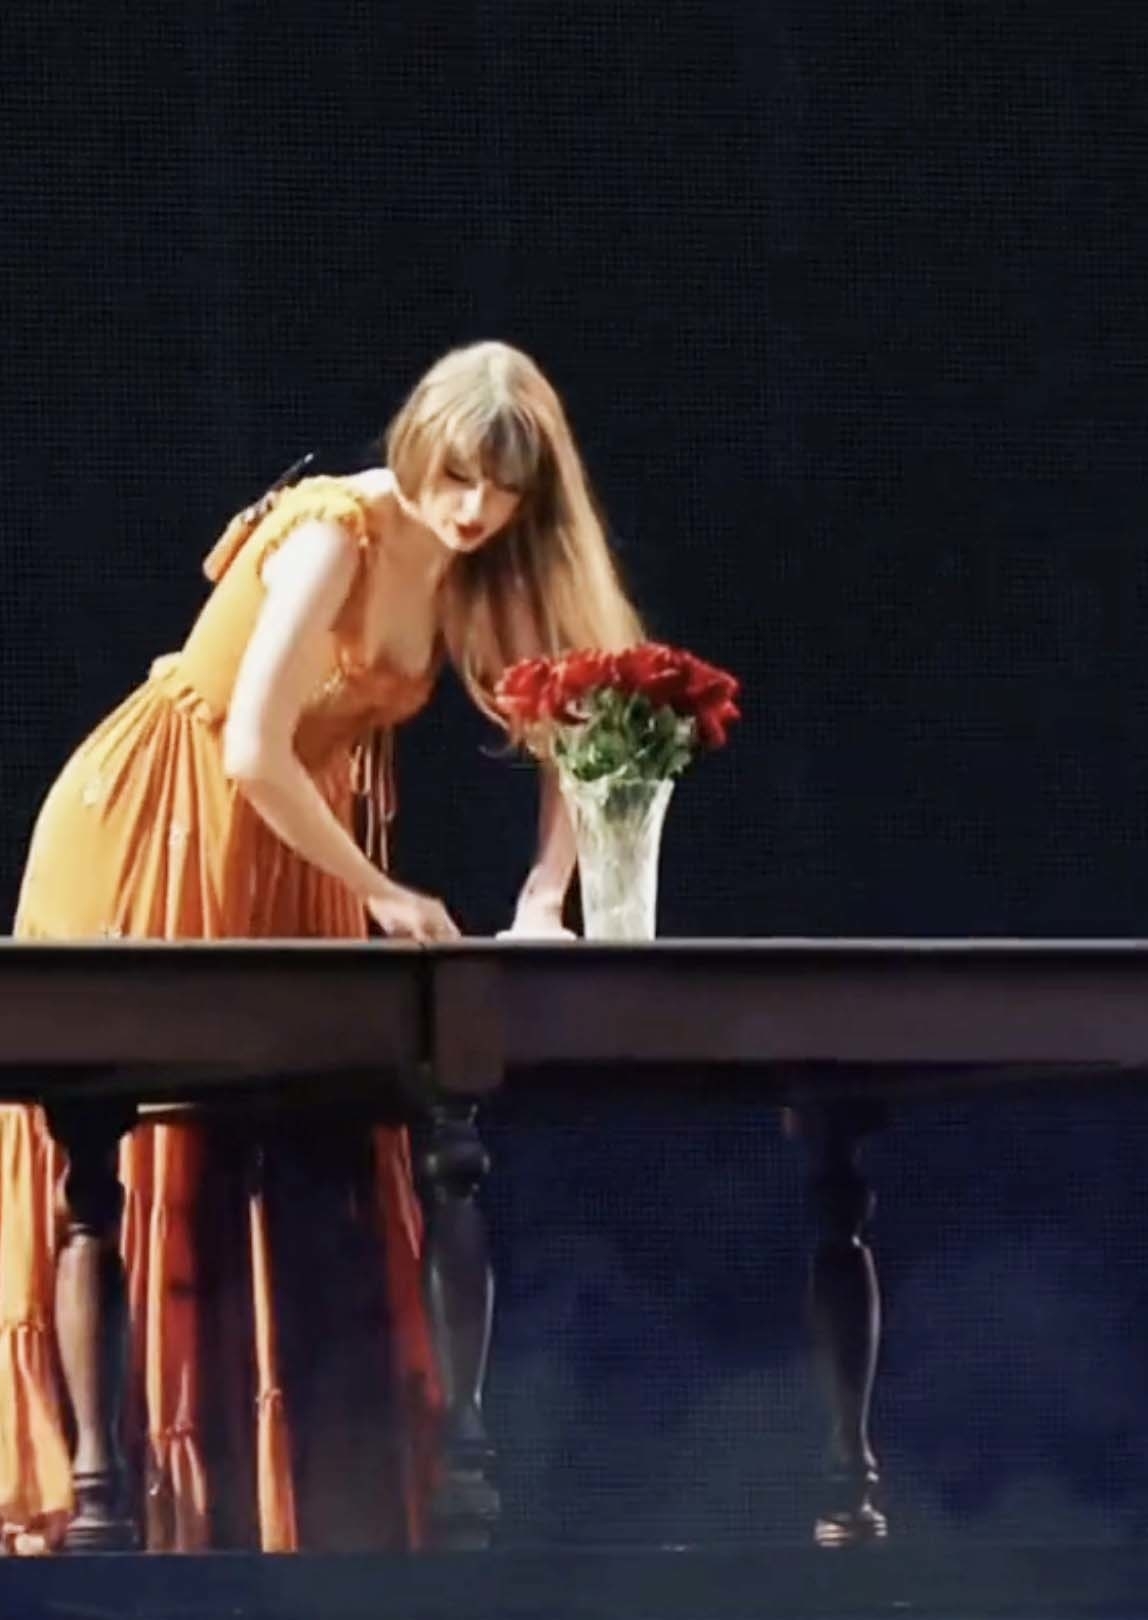 Taylor setting a table onstage